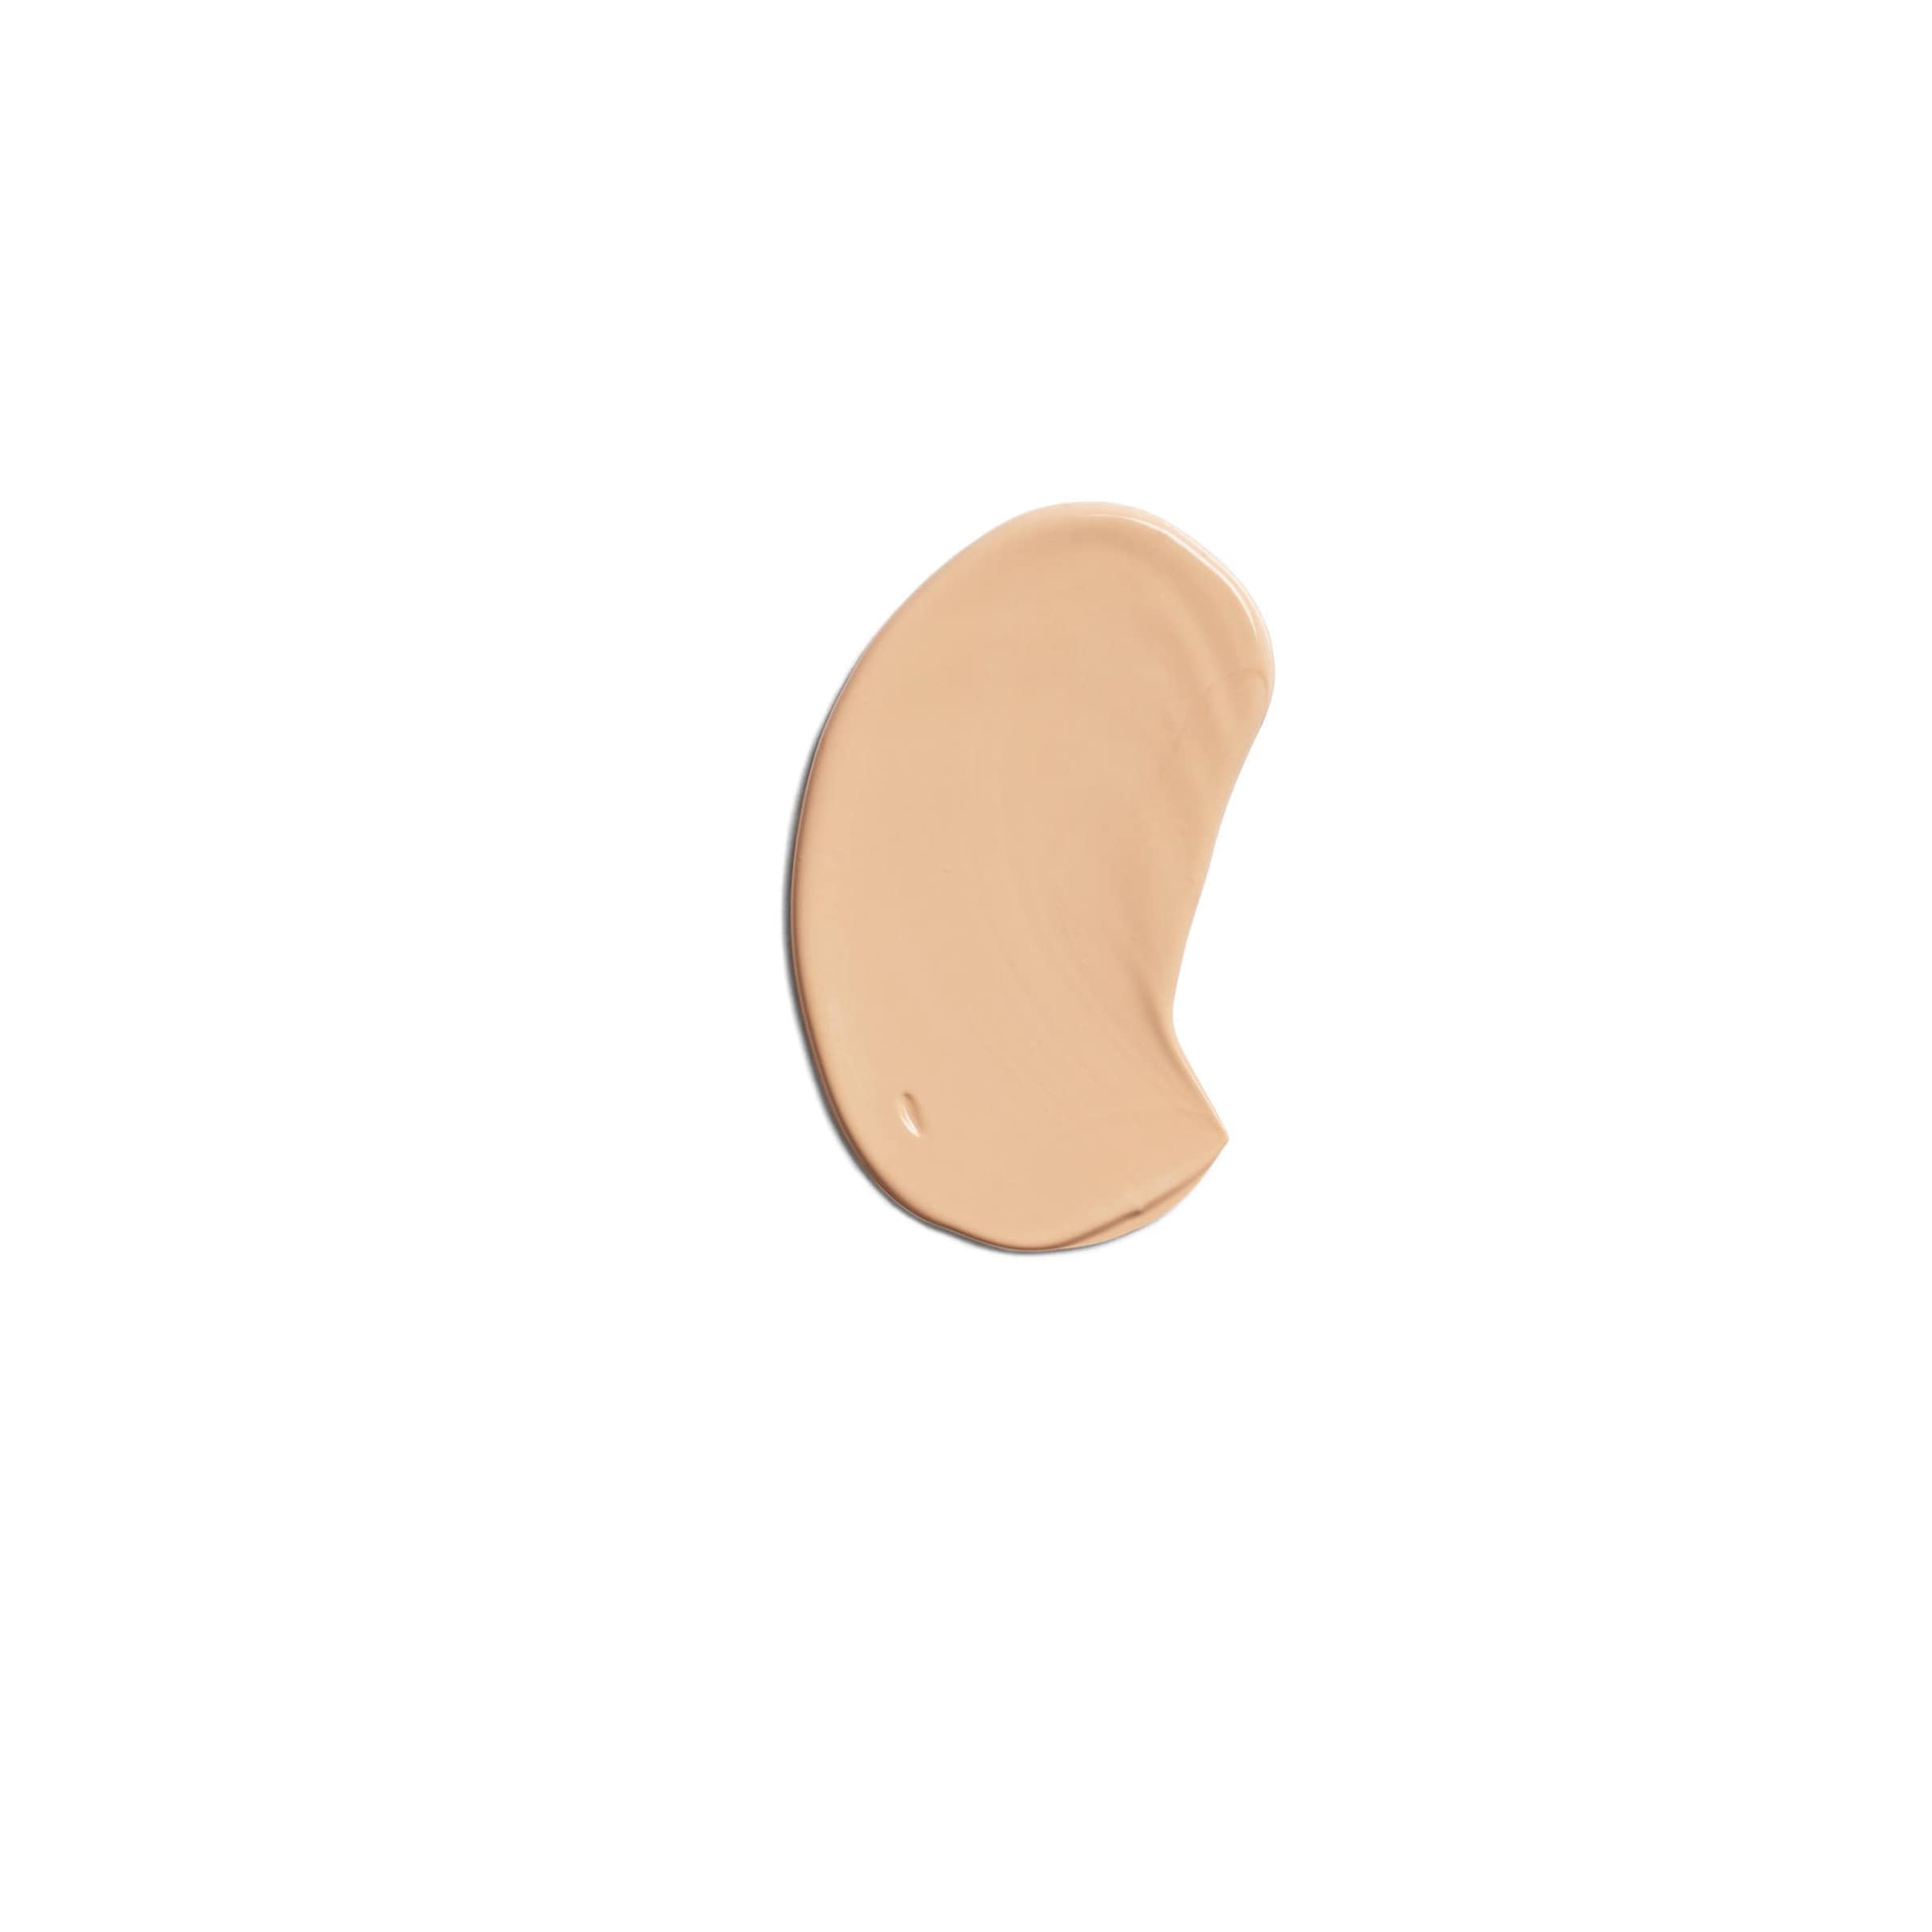 COVERGIRL, truBlend Liquid Foundation Makeup, Warm Beige, 1 oz, 1 Count (packaging may vary)